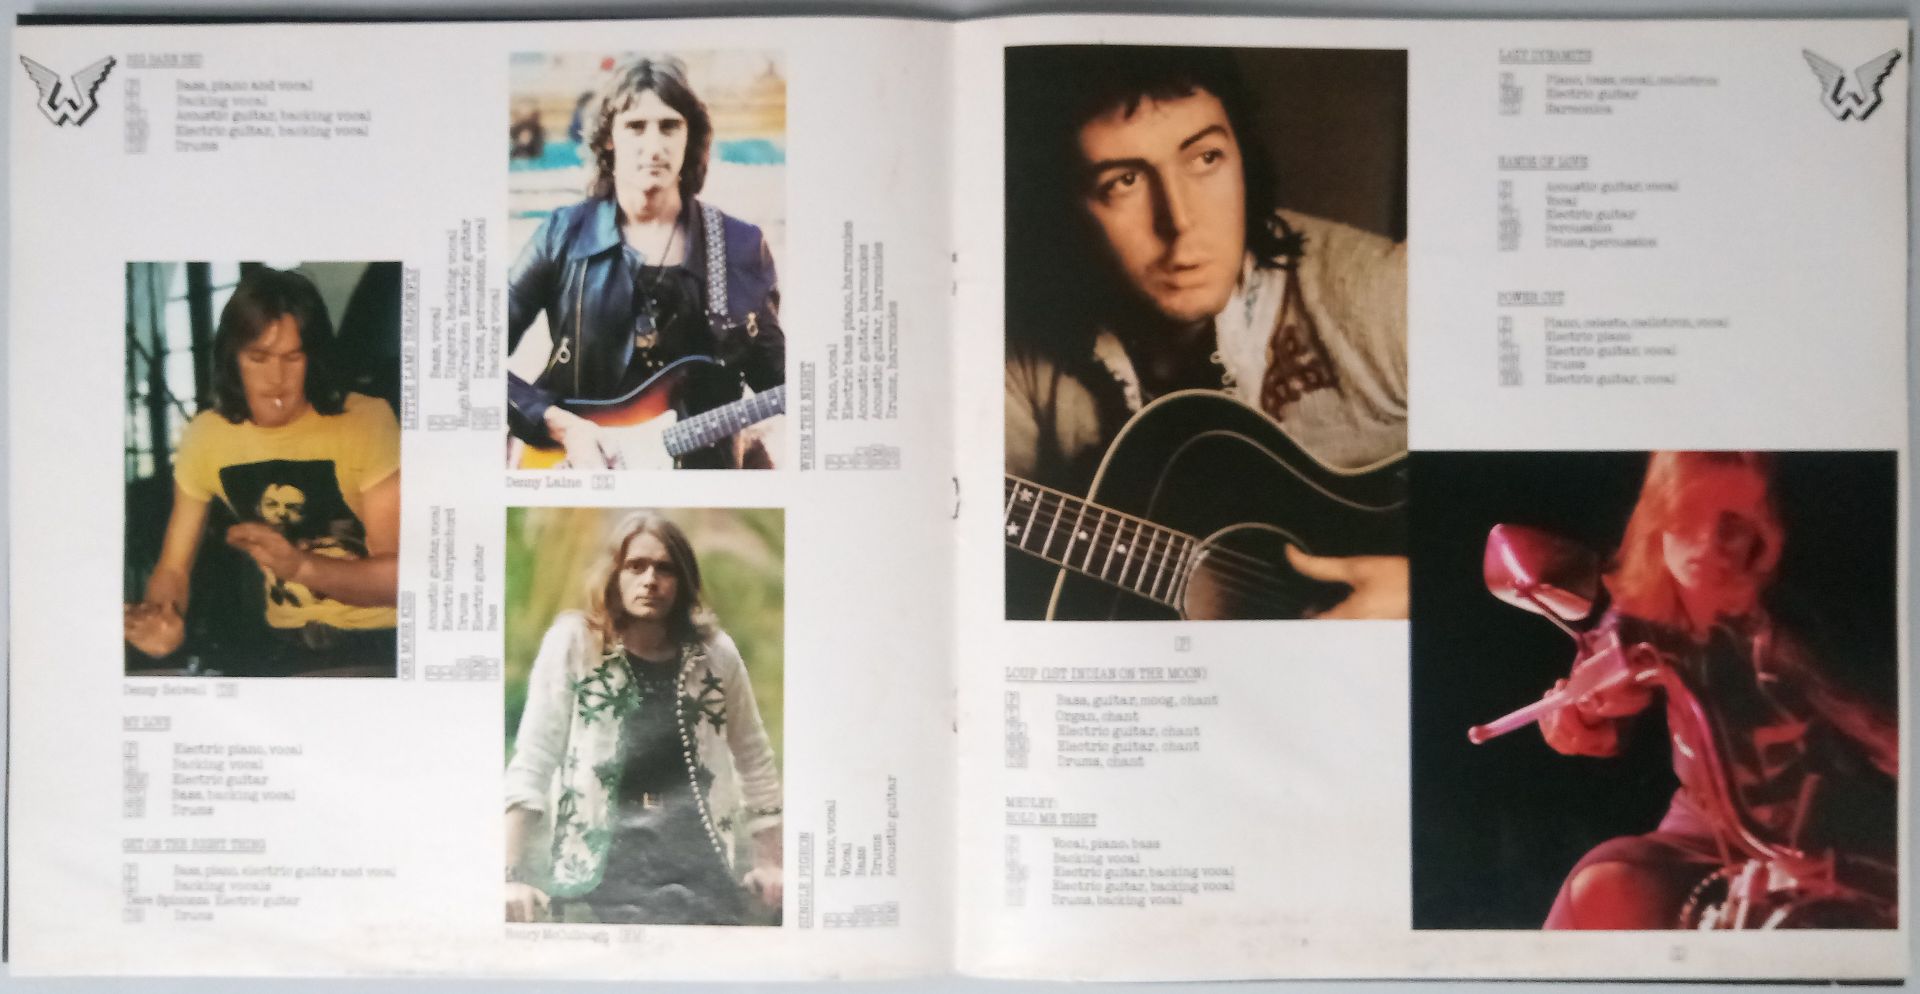 Sought after. Paul McCartney And Wings - Red Rose Speedway - 1973 - 12" Vinyl LP with booklet - Image 9 of 12